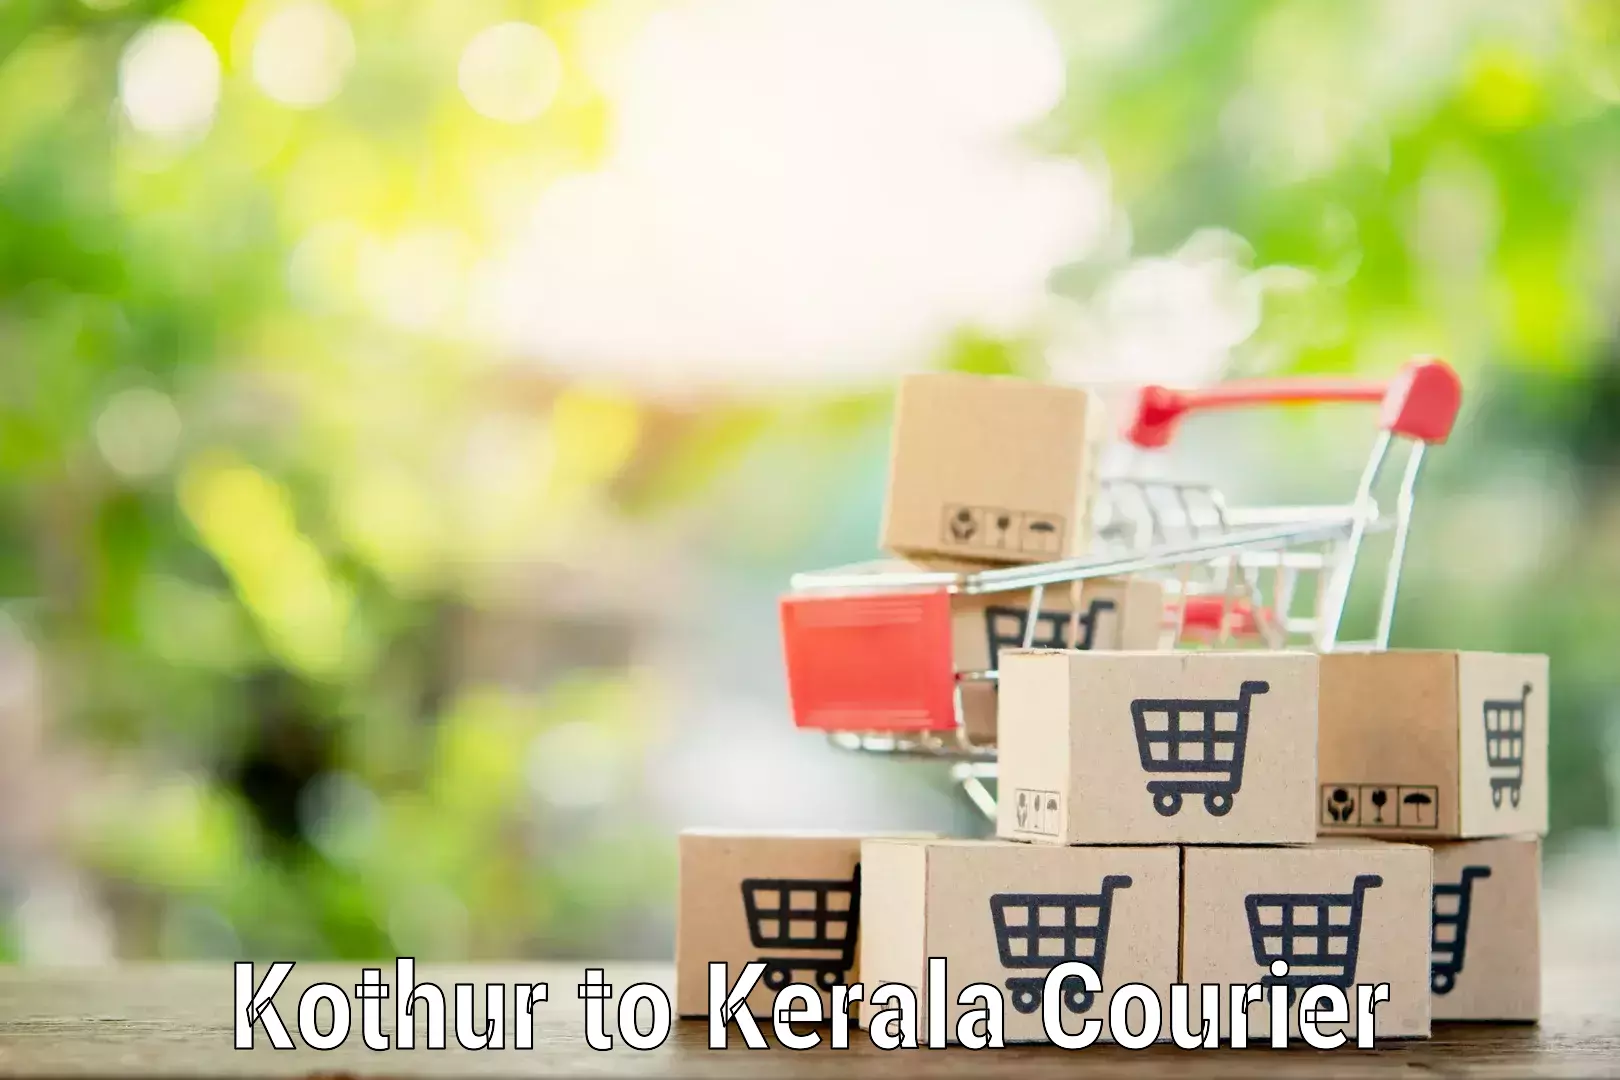 Furniture delivery service Kothur to Perumbavoor